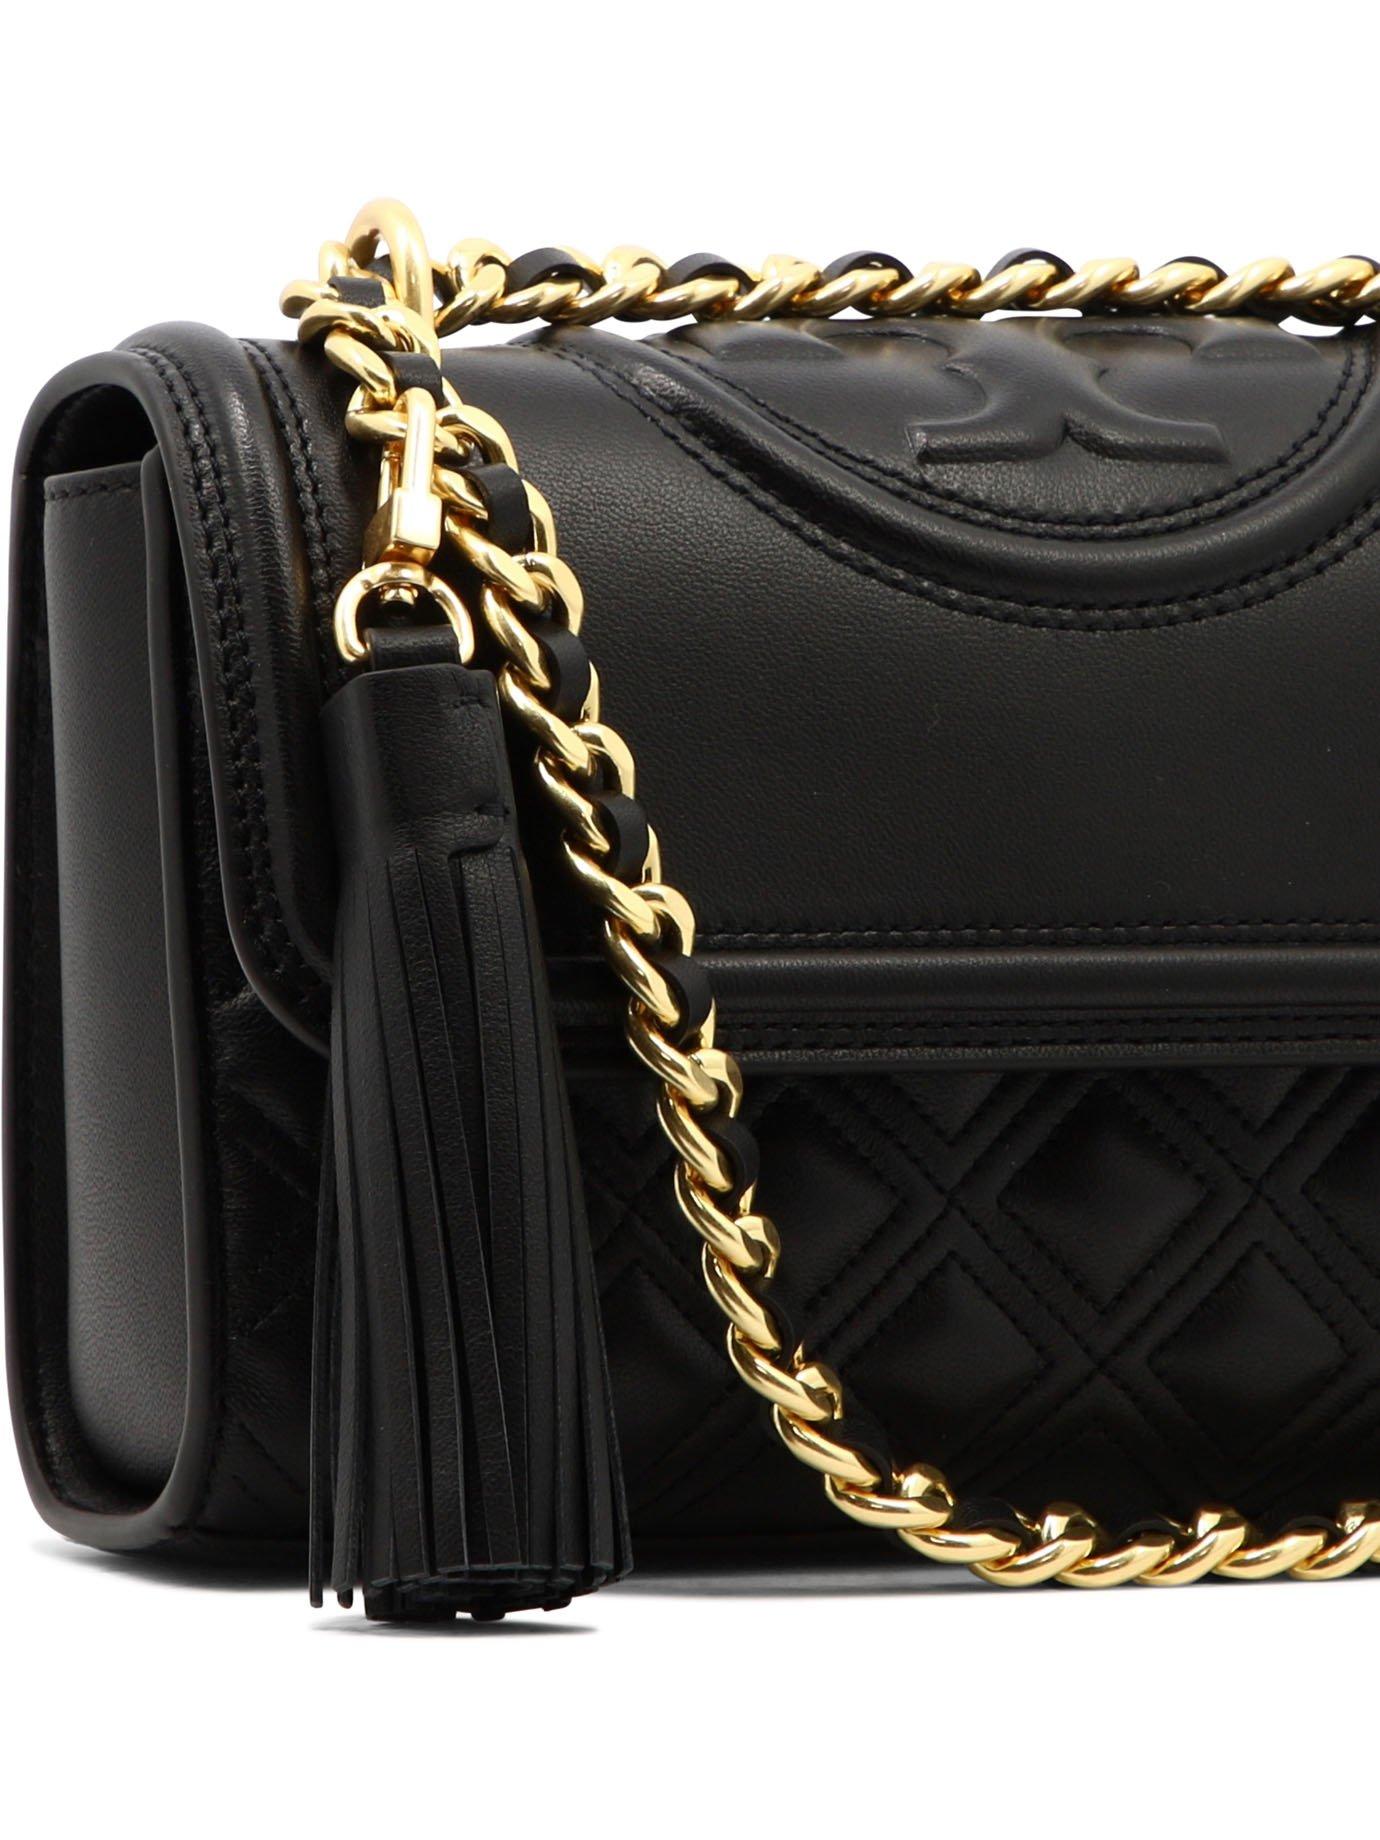 Tory Burch Fleming Chain Link Small Shoulder Bag in Black | Lyst